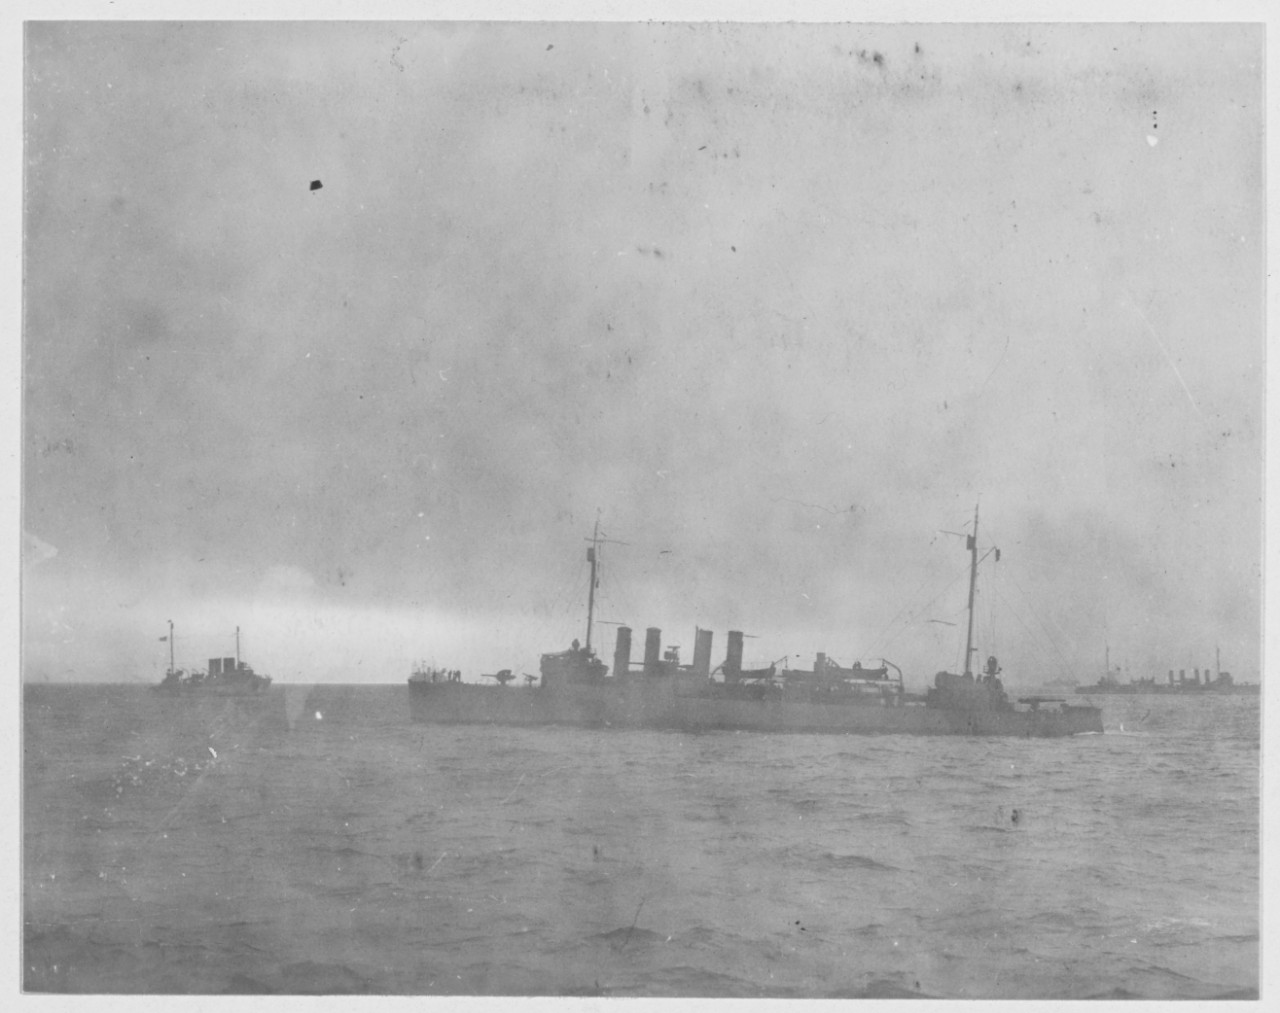 Photograph of American destroyers sailing into the harbor at Brest, France